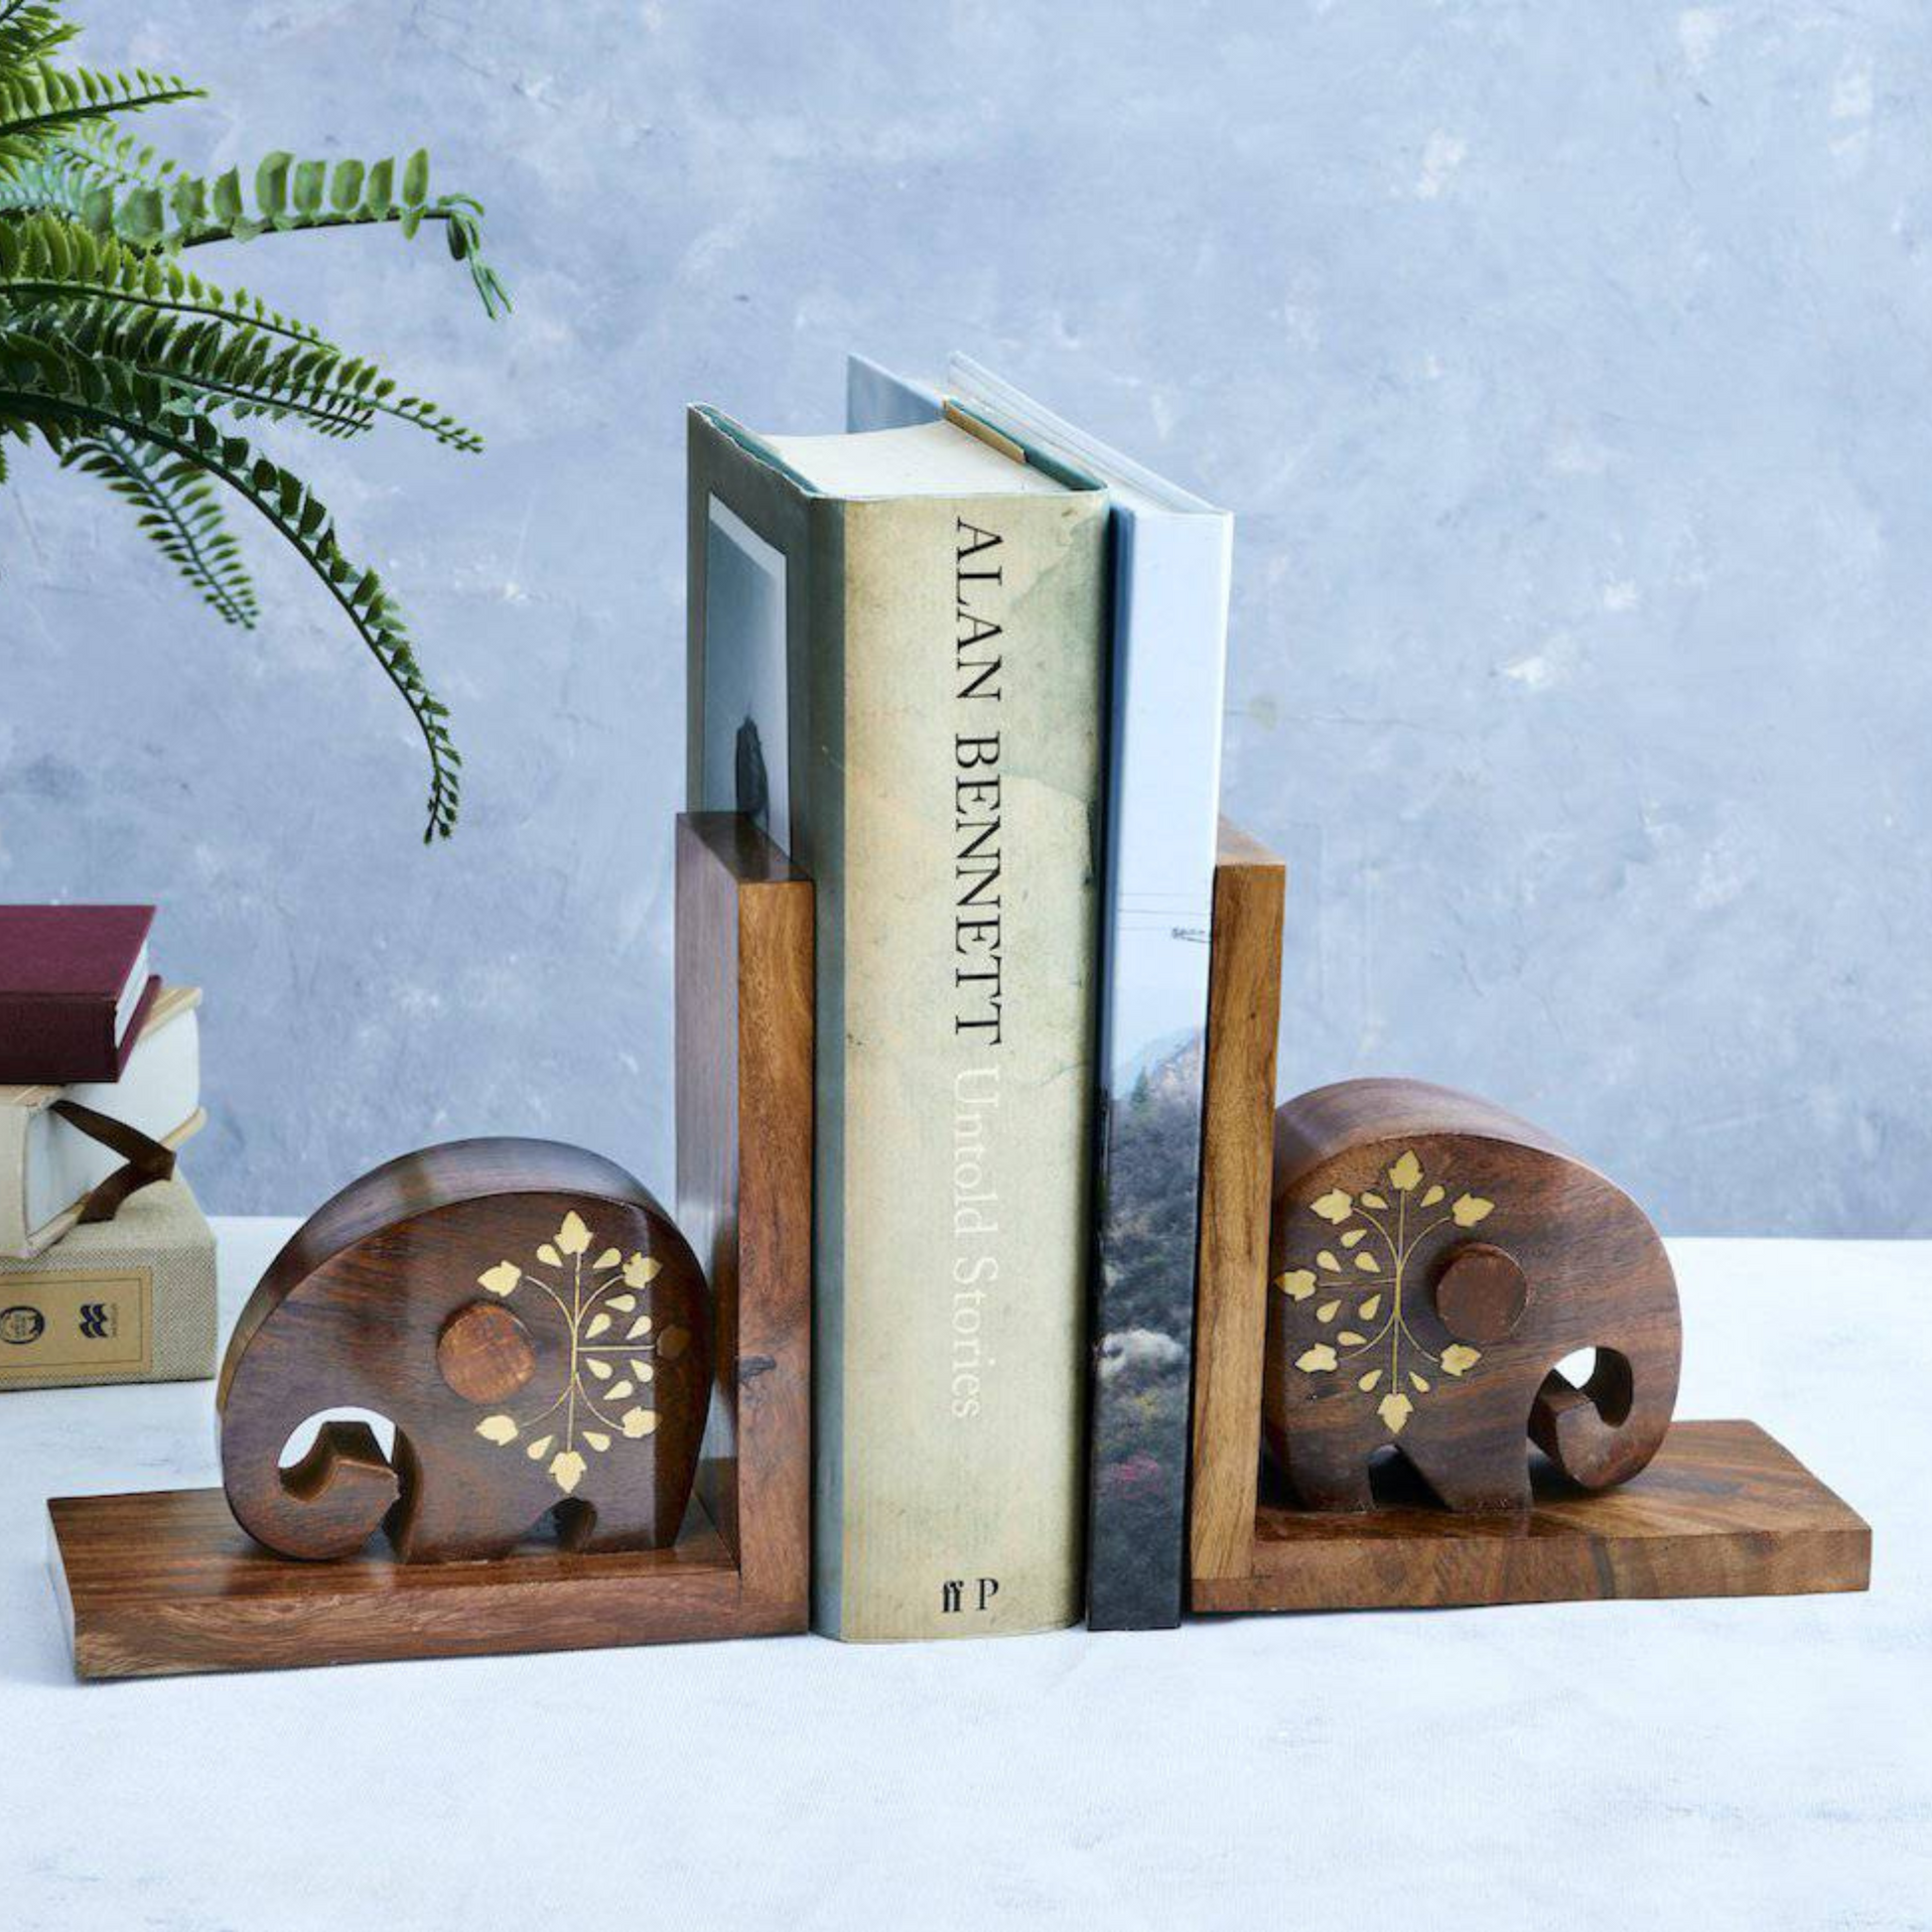 Elephant Wood and Brass Bookends, Bookworm Gift, Hand carved Holder